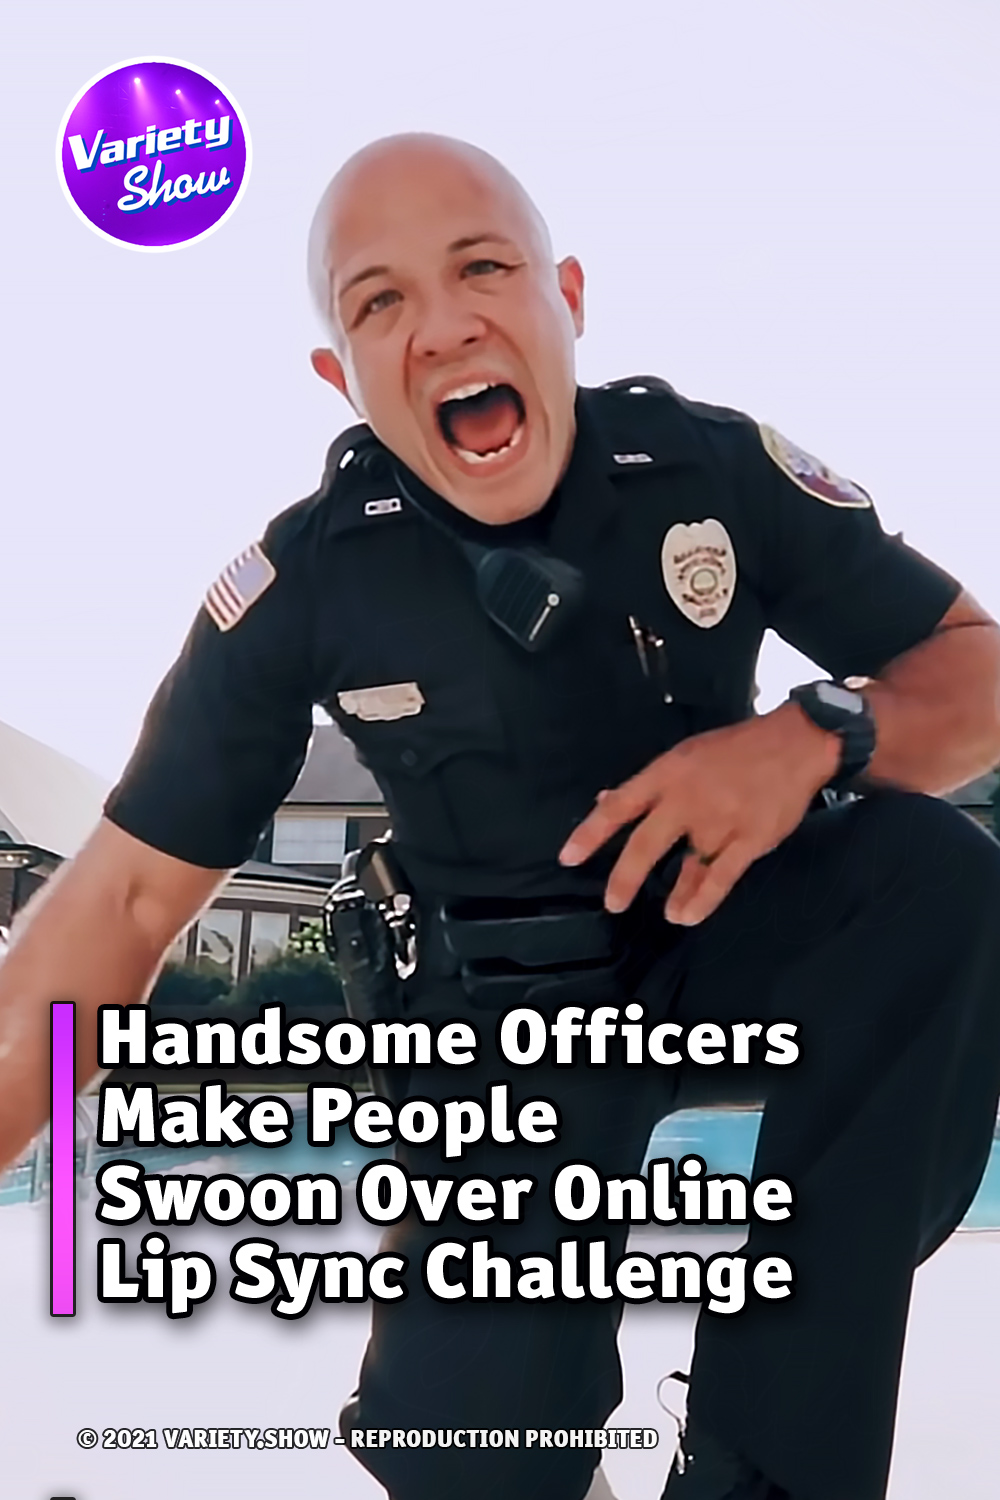 Handsome Officers Make People Swoon Over Online Lip Sync Challenge